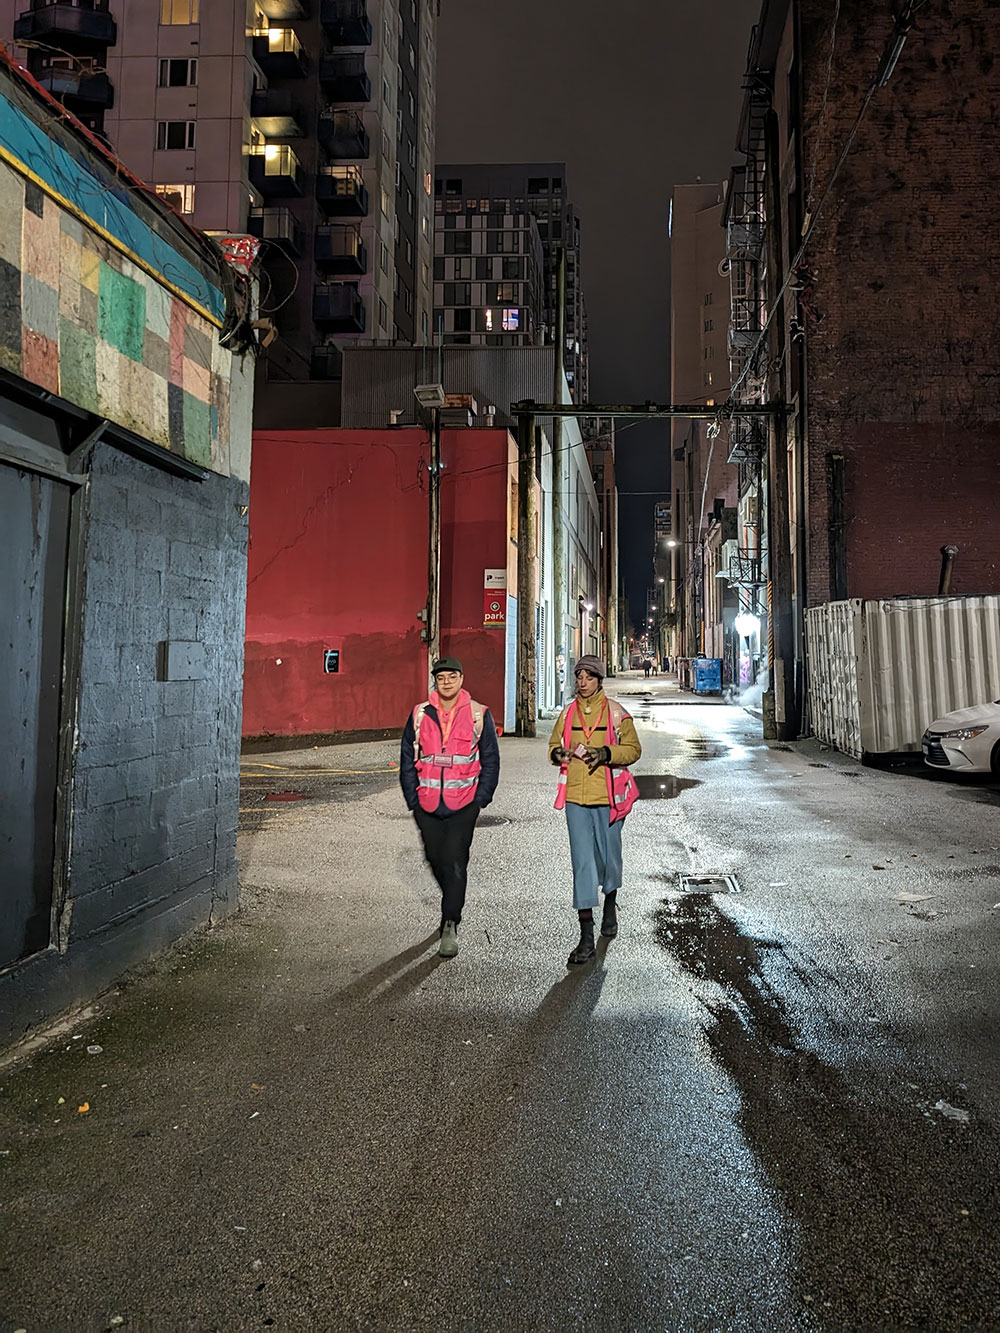 Two people in pink vests walk down an alleyway towards the camera.